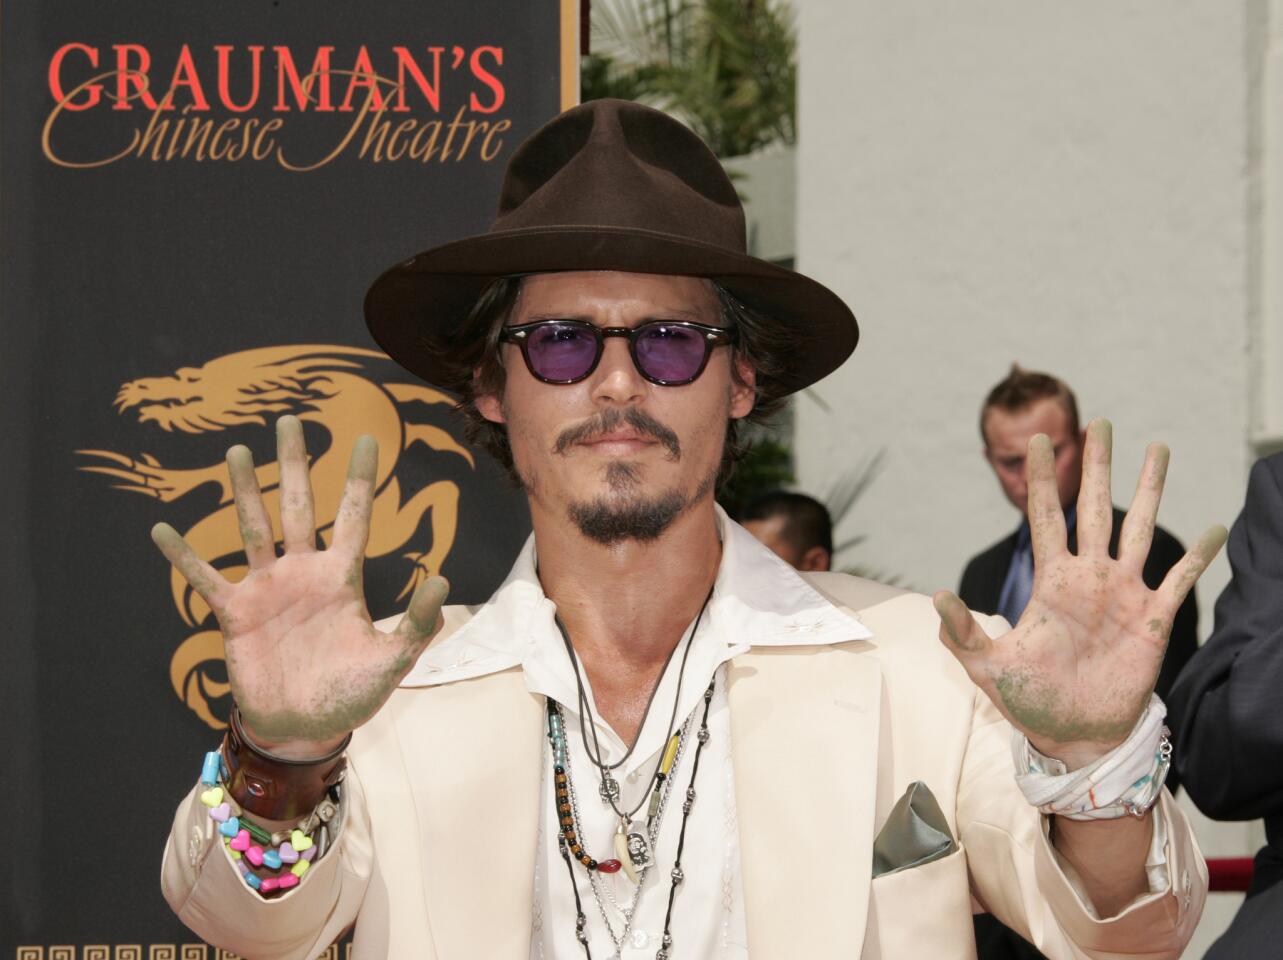 Johnny Depp: Life in pictures